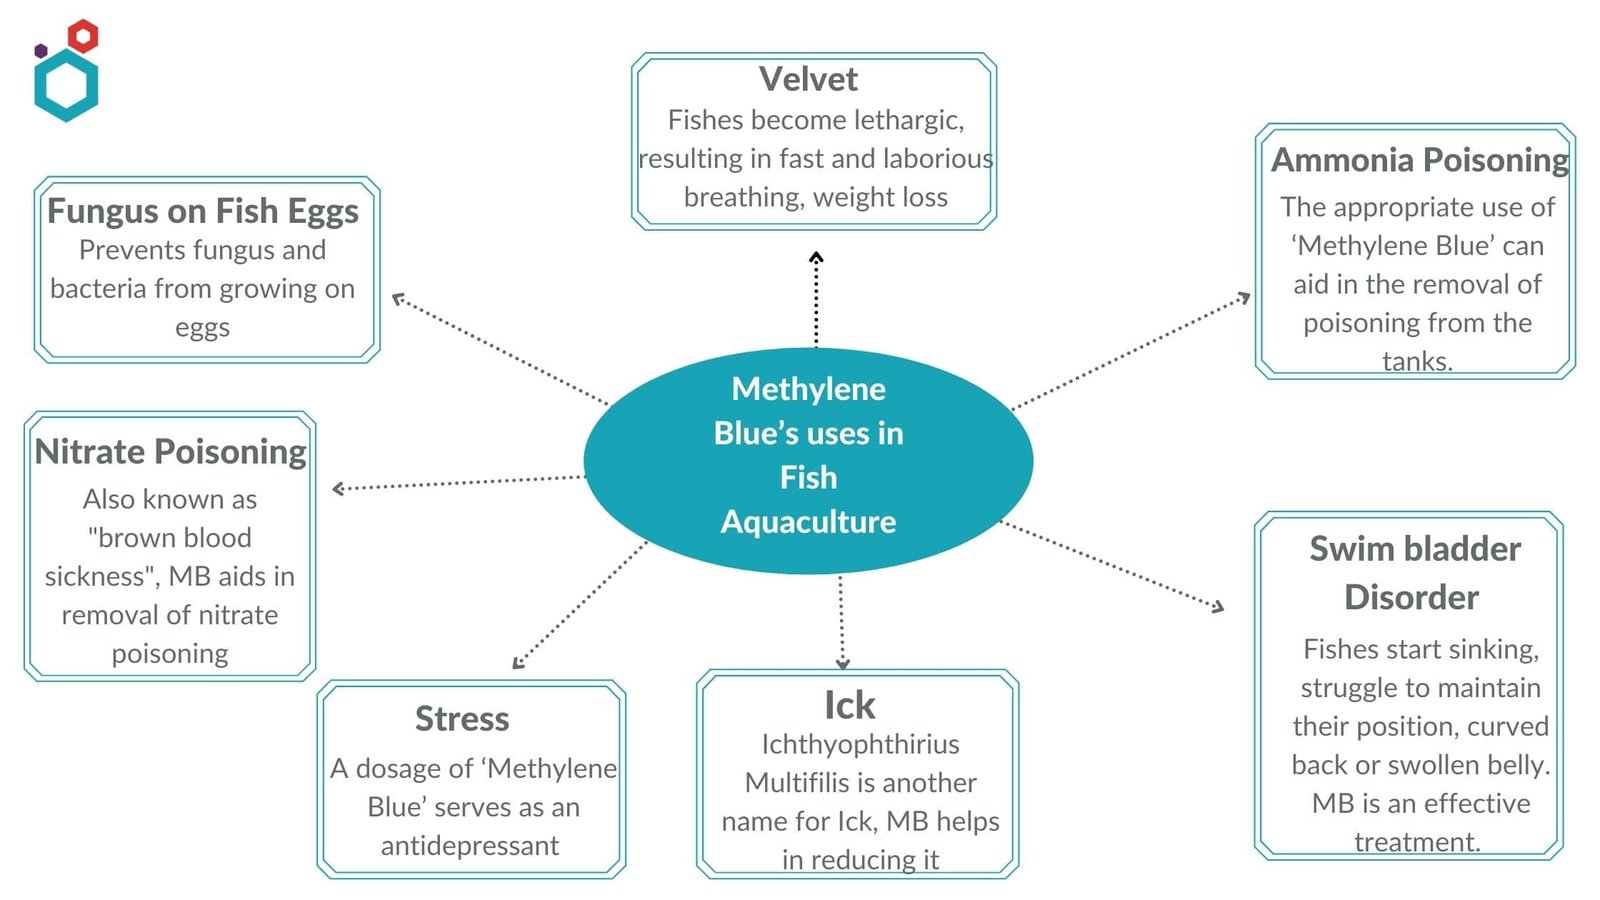 Uses of Methylene Blue for Fish Aquaculture